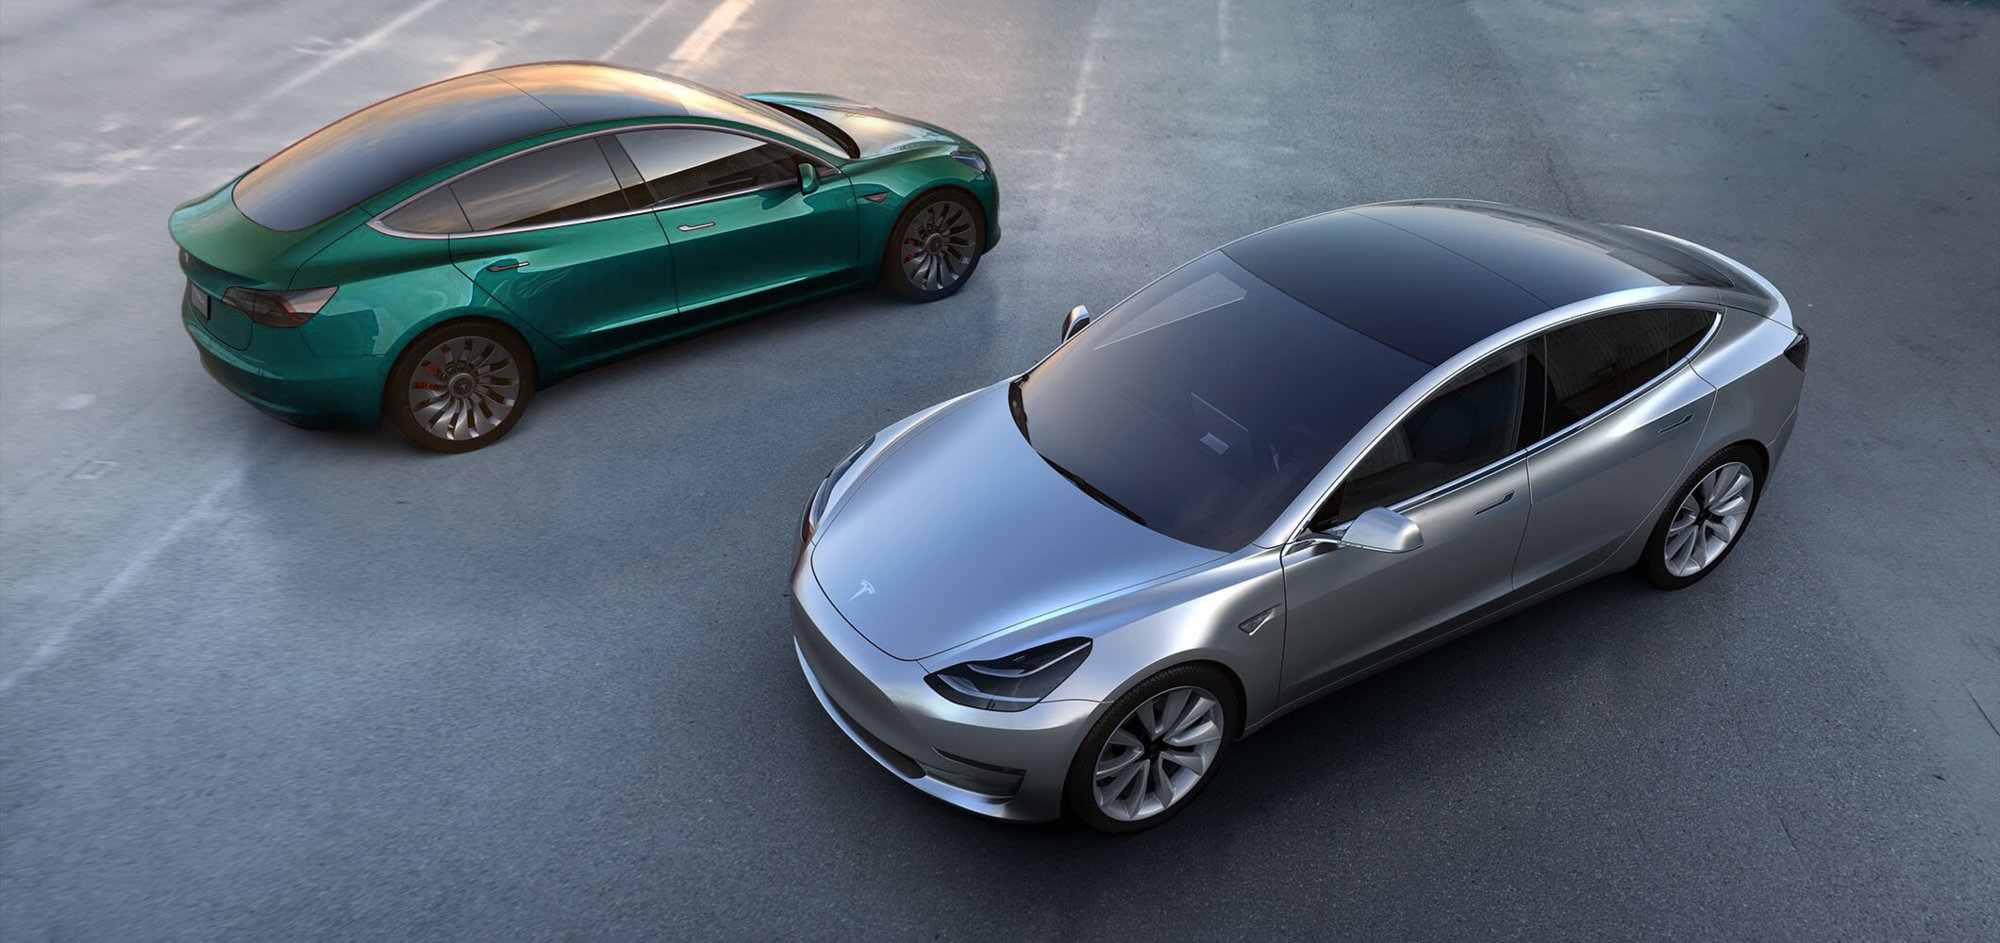 tesla-model-3-gets-rendered-in-dozens-of-colors-looks-good-in-all-of-them_4.jpg